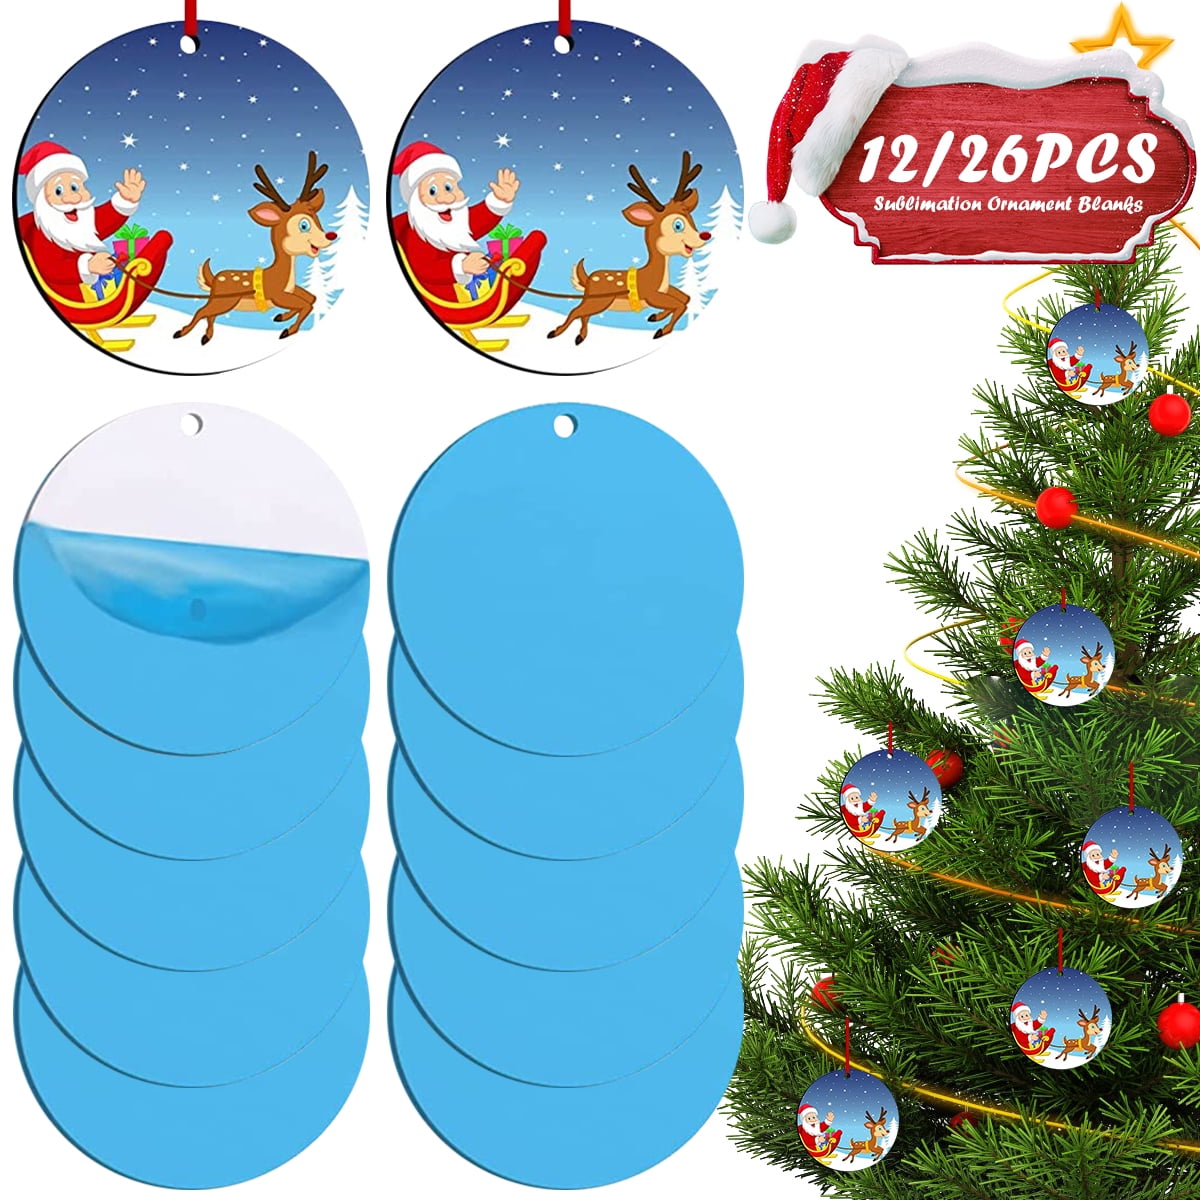 Austok Christmas Sublimation Ornament with Red String Double Sides Sublimation  Ornament Blanks Round Lightweight Sublimation Blanks Ornaments Bulk for  Decoration Christmas Xmas Tree Halloween 